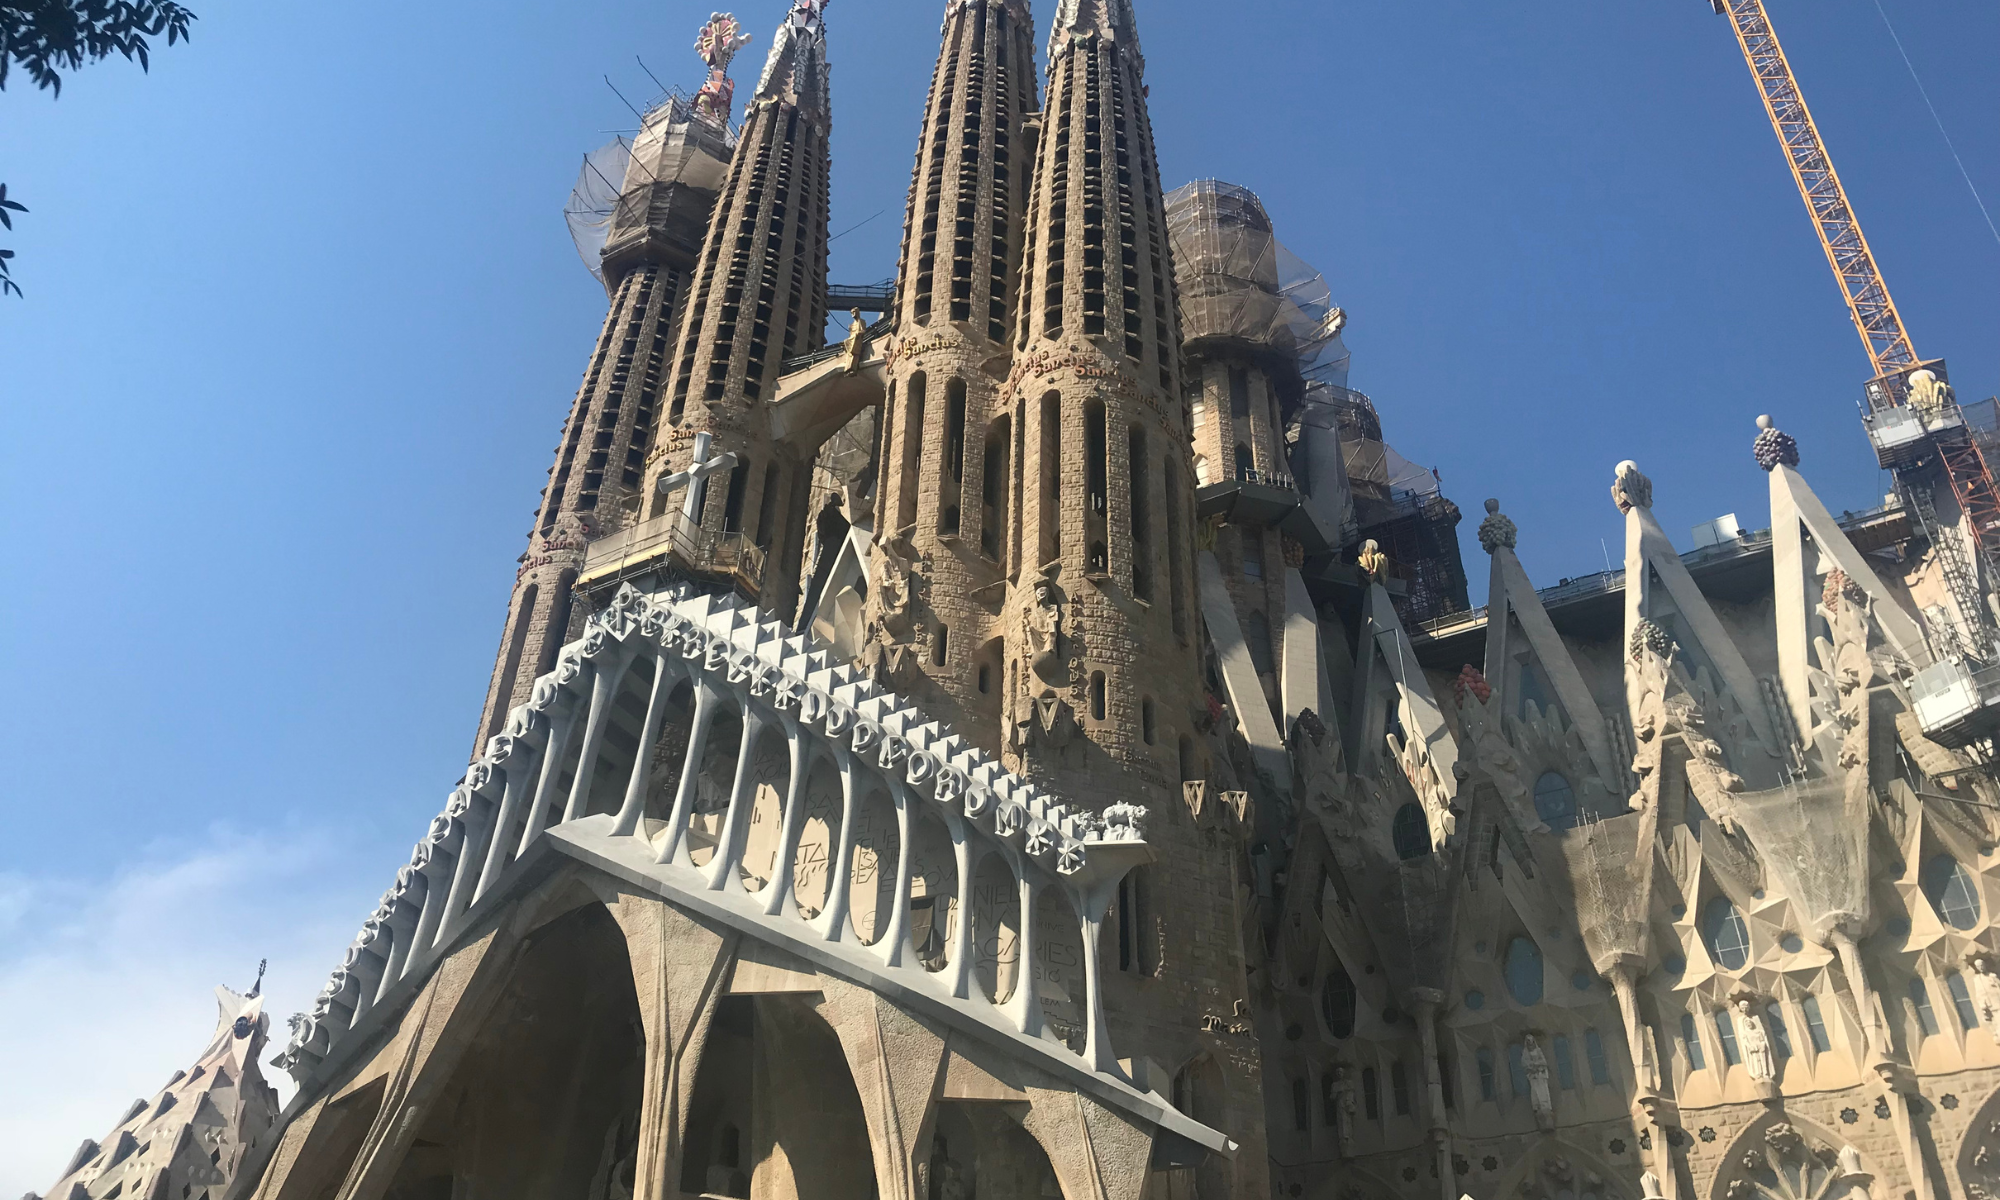 <p>Barcelona is one of Spain’s most world-renowned cities. Located on the northeastern coast, it stretches along the Mediterranean Sea. The city is a unique blend of old and new, with centuries-old buildings standing side by side with modern architecture.</p><p>A must-see in <a href="https://travelswiththecrew.com/6-best-day-trips-from-barcelona/" title="6 Best Day Trips From Barcelona">Barcelona</a> is La Sagrada Familia – a church designed by Antoni Gaudí which, despite being unfinished, is one of the most visited monuments in the world. Another of Gaudí´s creations, Park Güell, is also worth a visit. This public park is home to many of his famous mosaic designs.</p><p>Of course, no trip to Barcelona would be complete without sampling the local food. Catalan cuisine is a delicious mix of Spanish and French fare. Try the traditional dish, paella, or go for something a little more unusual like squid ink risotto.</p><h4 class="rwmb-group-title">Shortcode:   </h4>